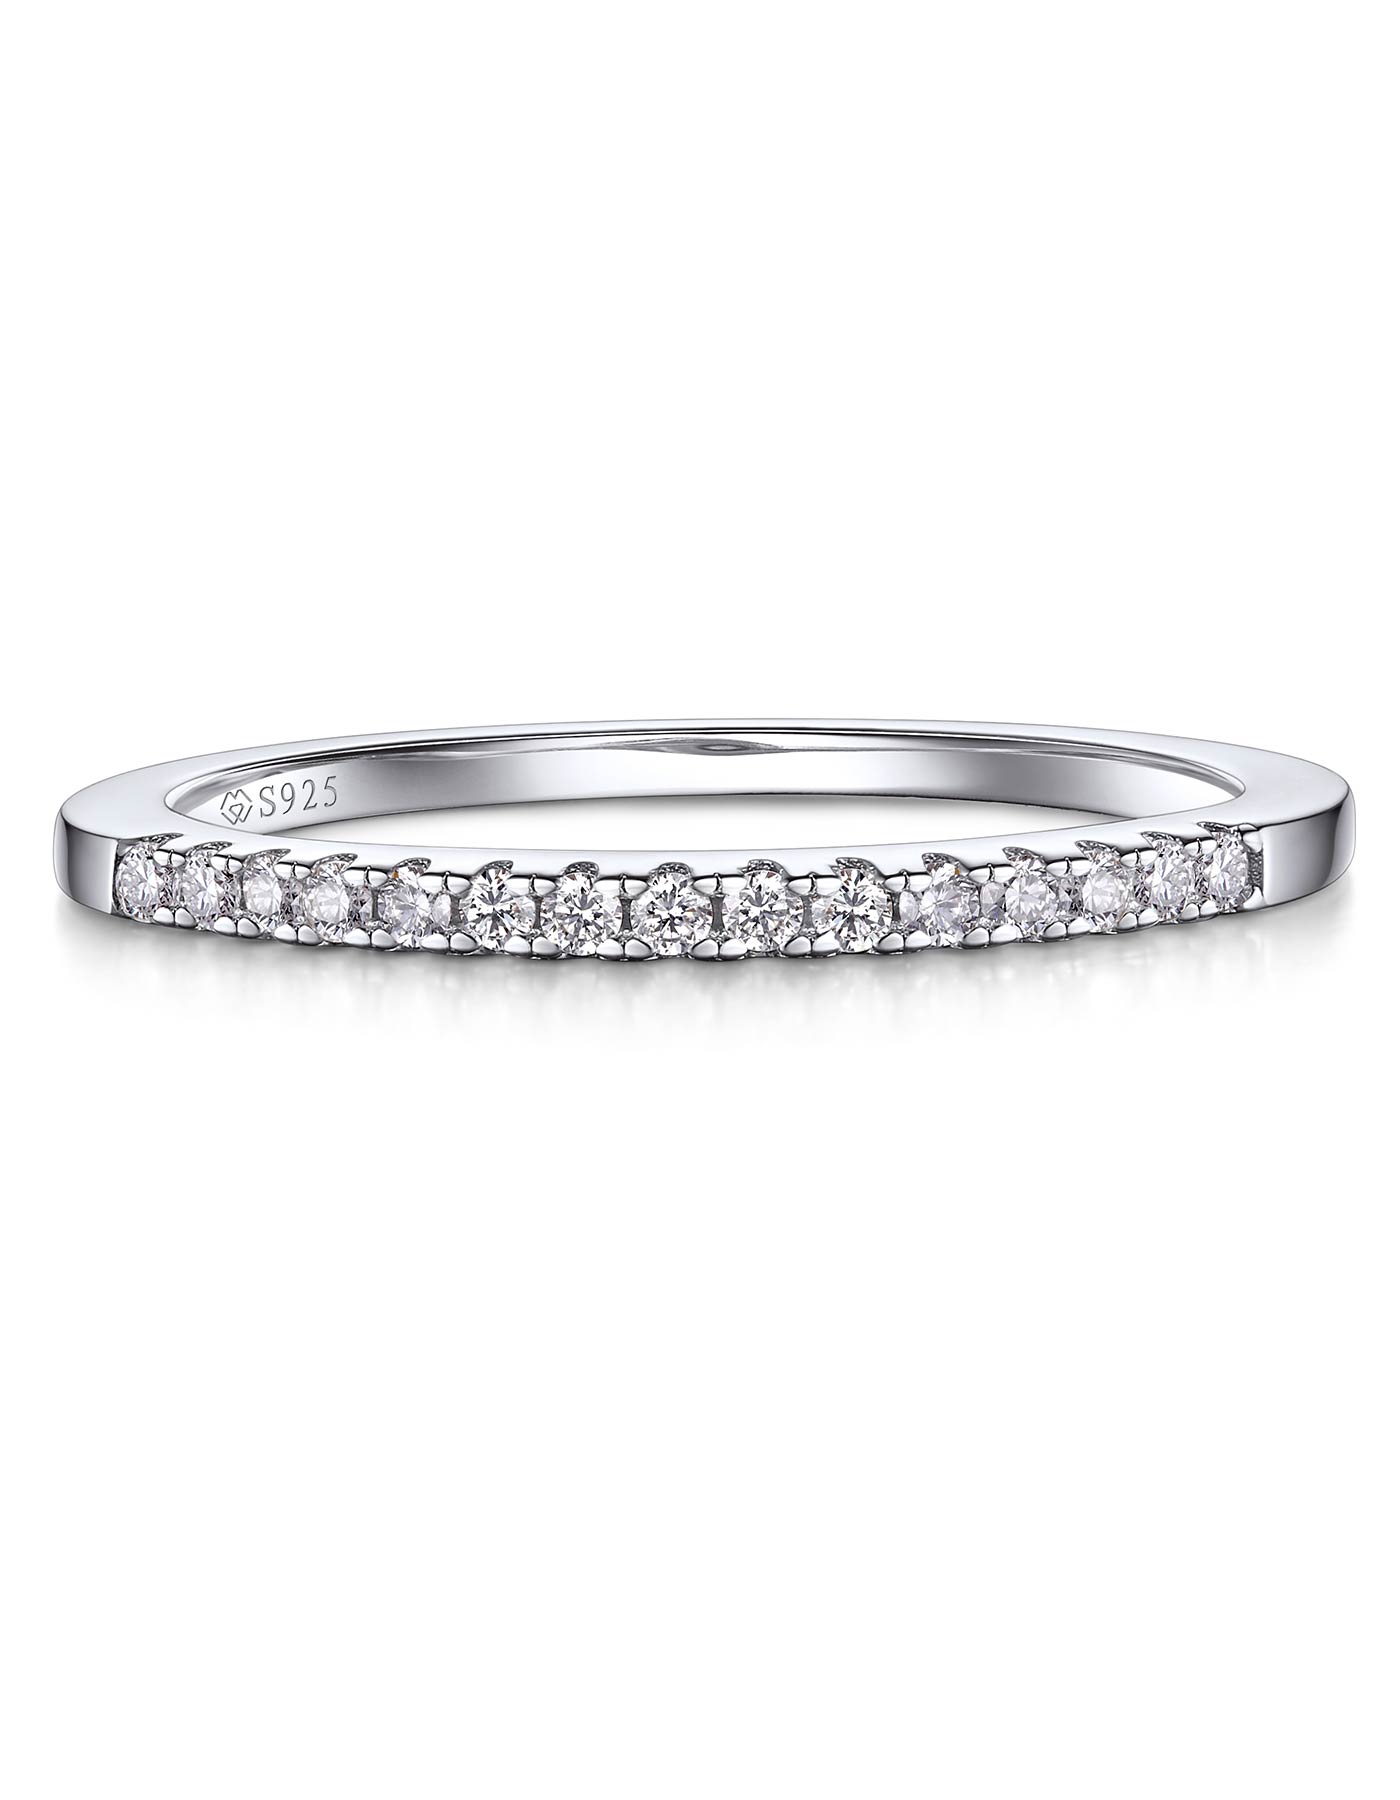 MomentWish 925 Sterling Silver Moissanite Wedding Band Ring